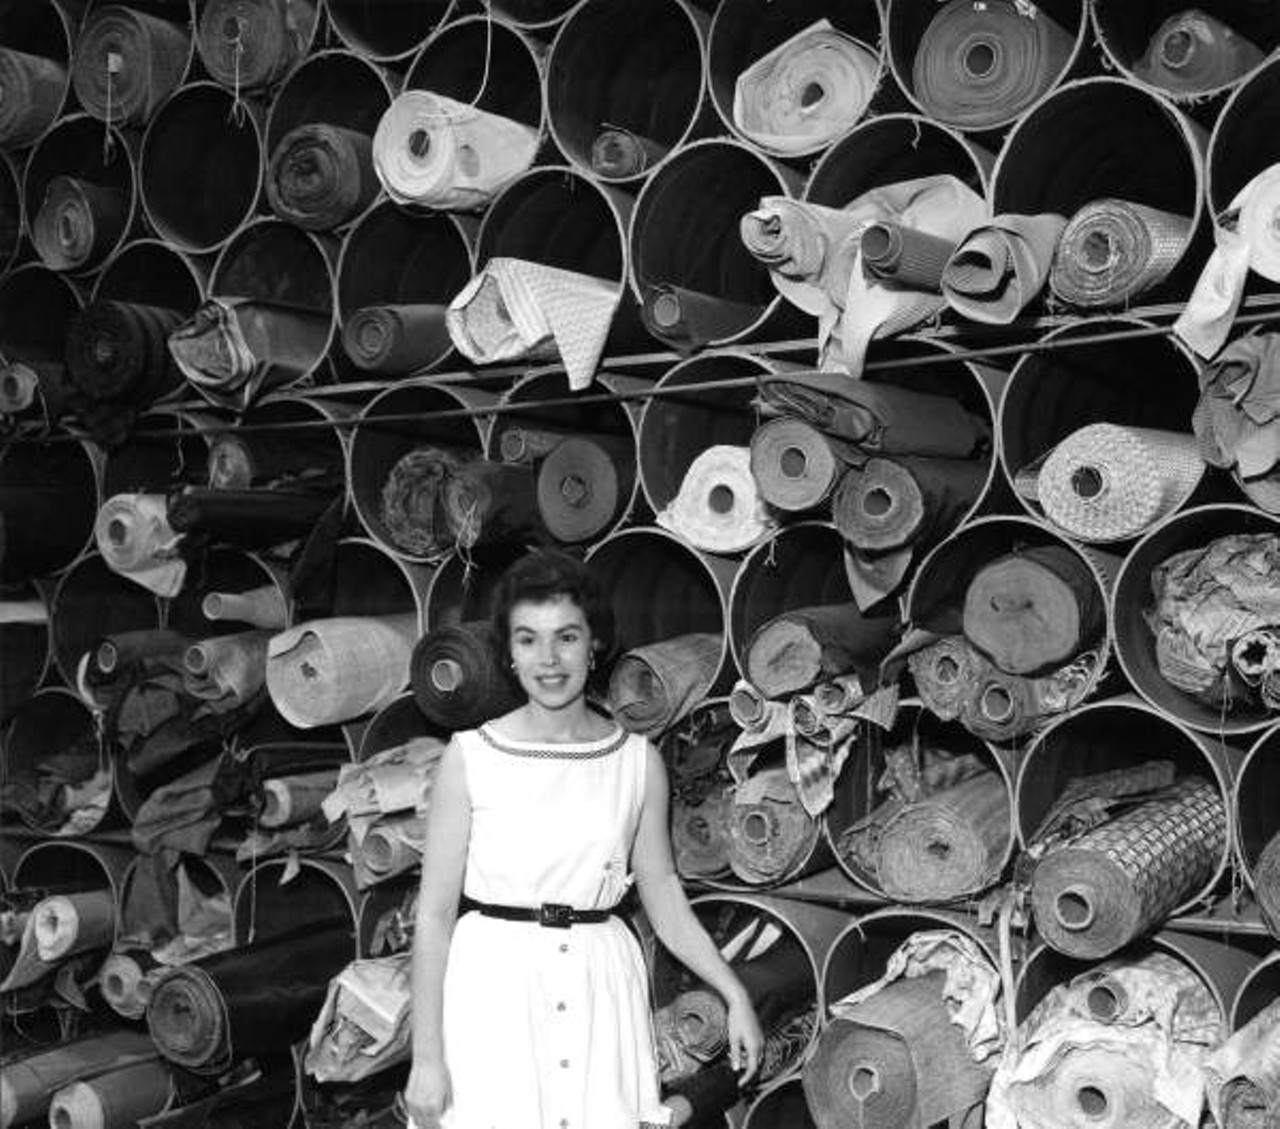 Mercedes Ficarrotta stands in front of upholstery fabrics - Tampa, Florida (1960).